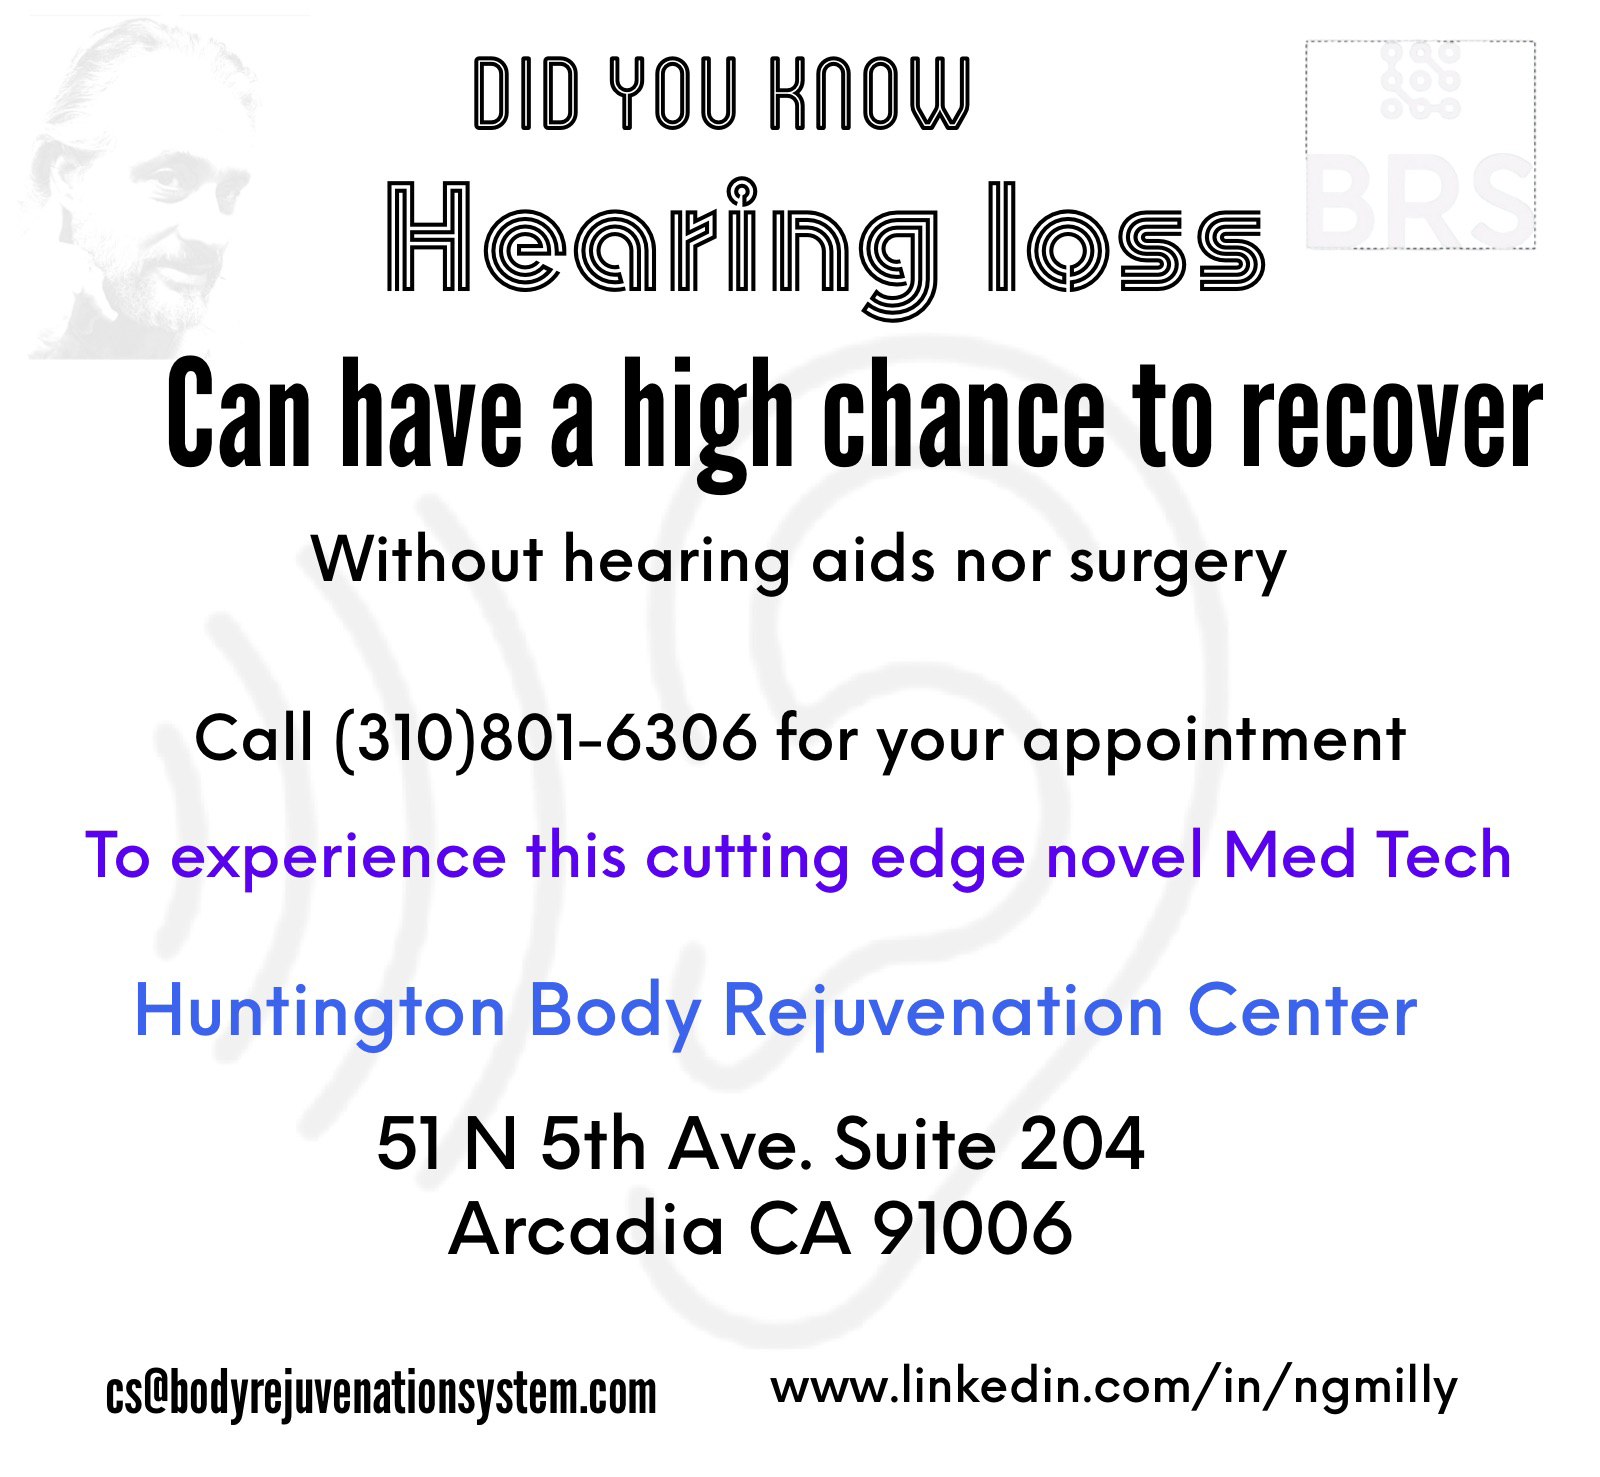 learn how to recover from hearing loss with Huntington Body Rejuvenation flyer 